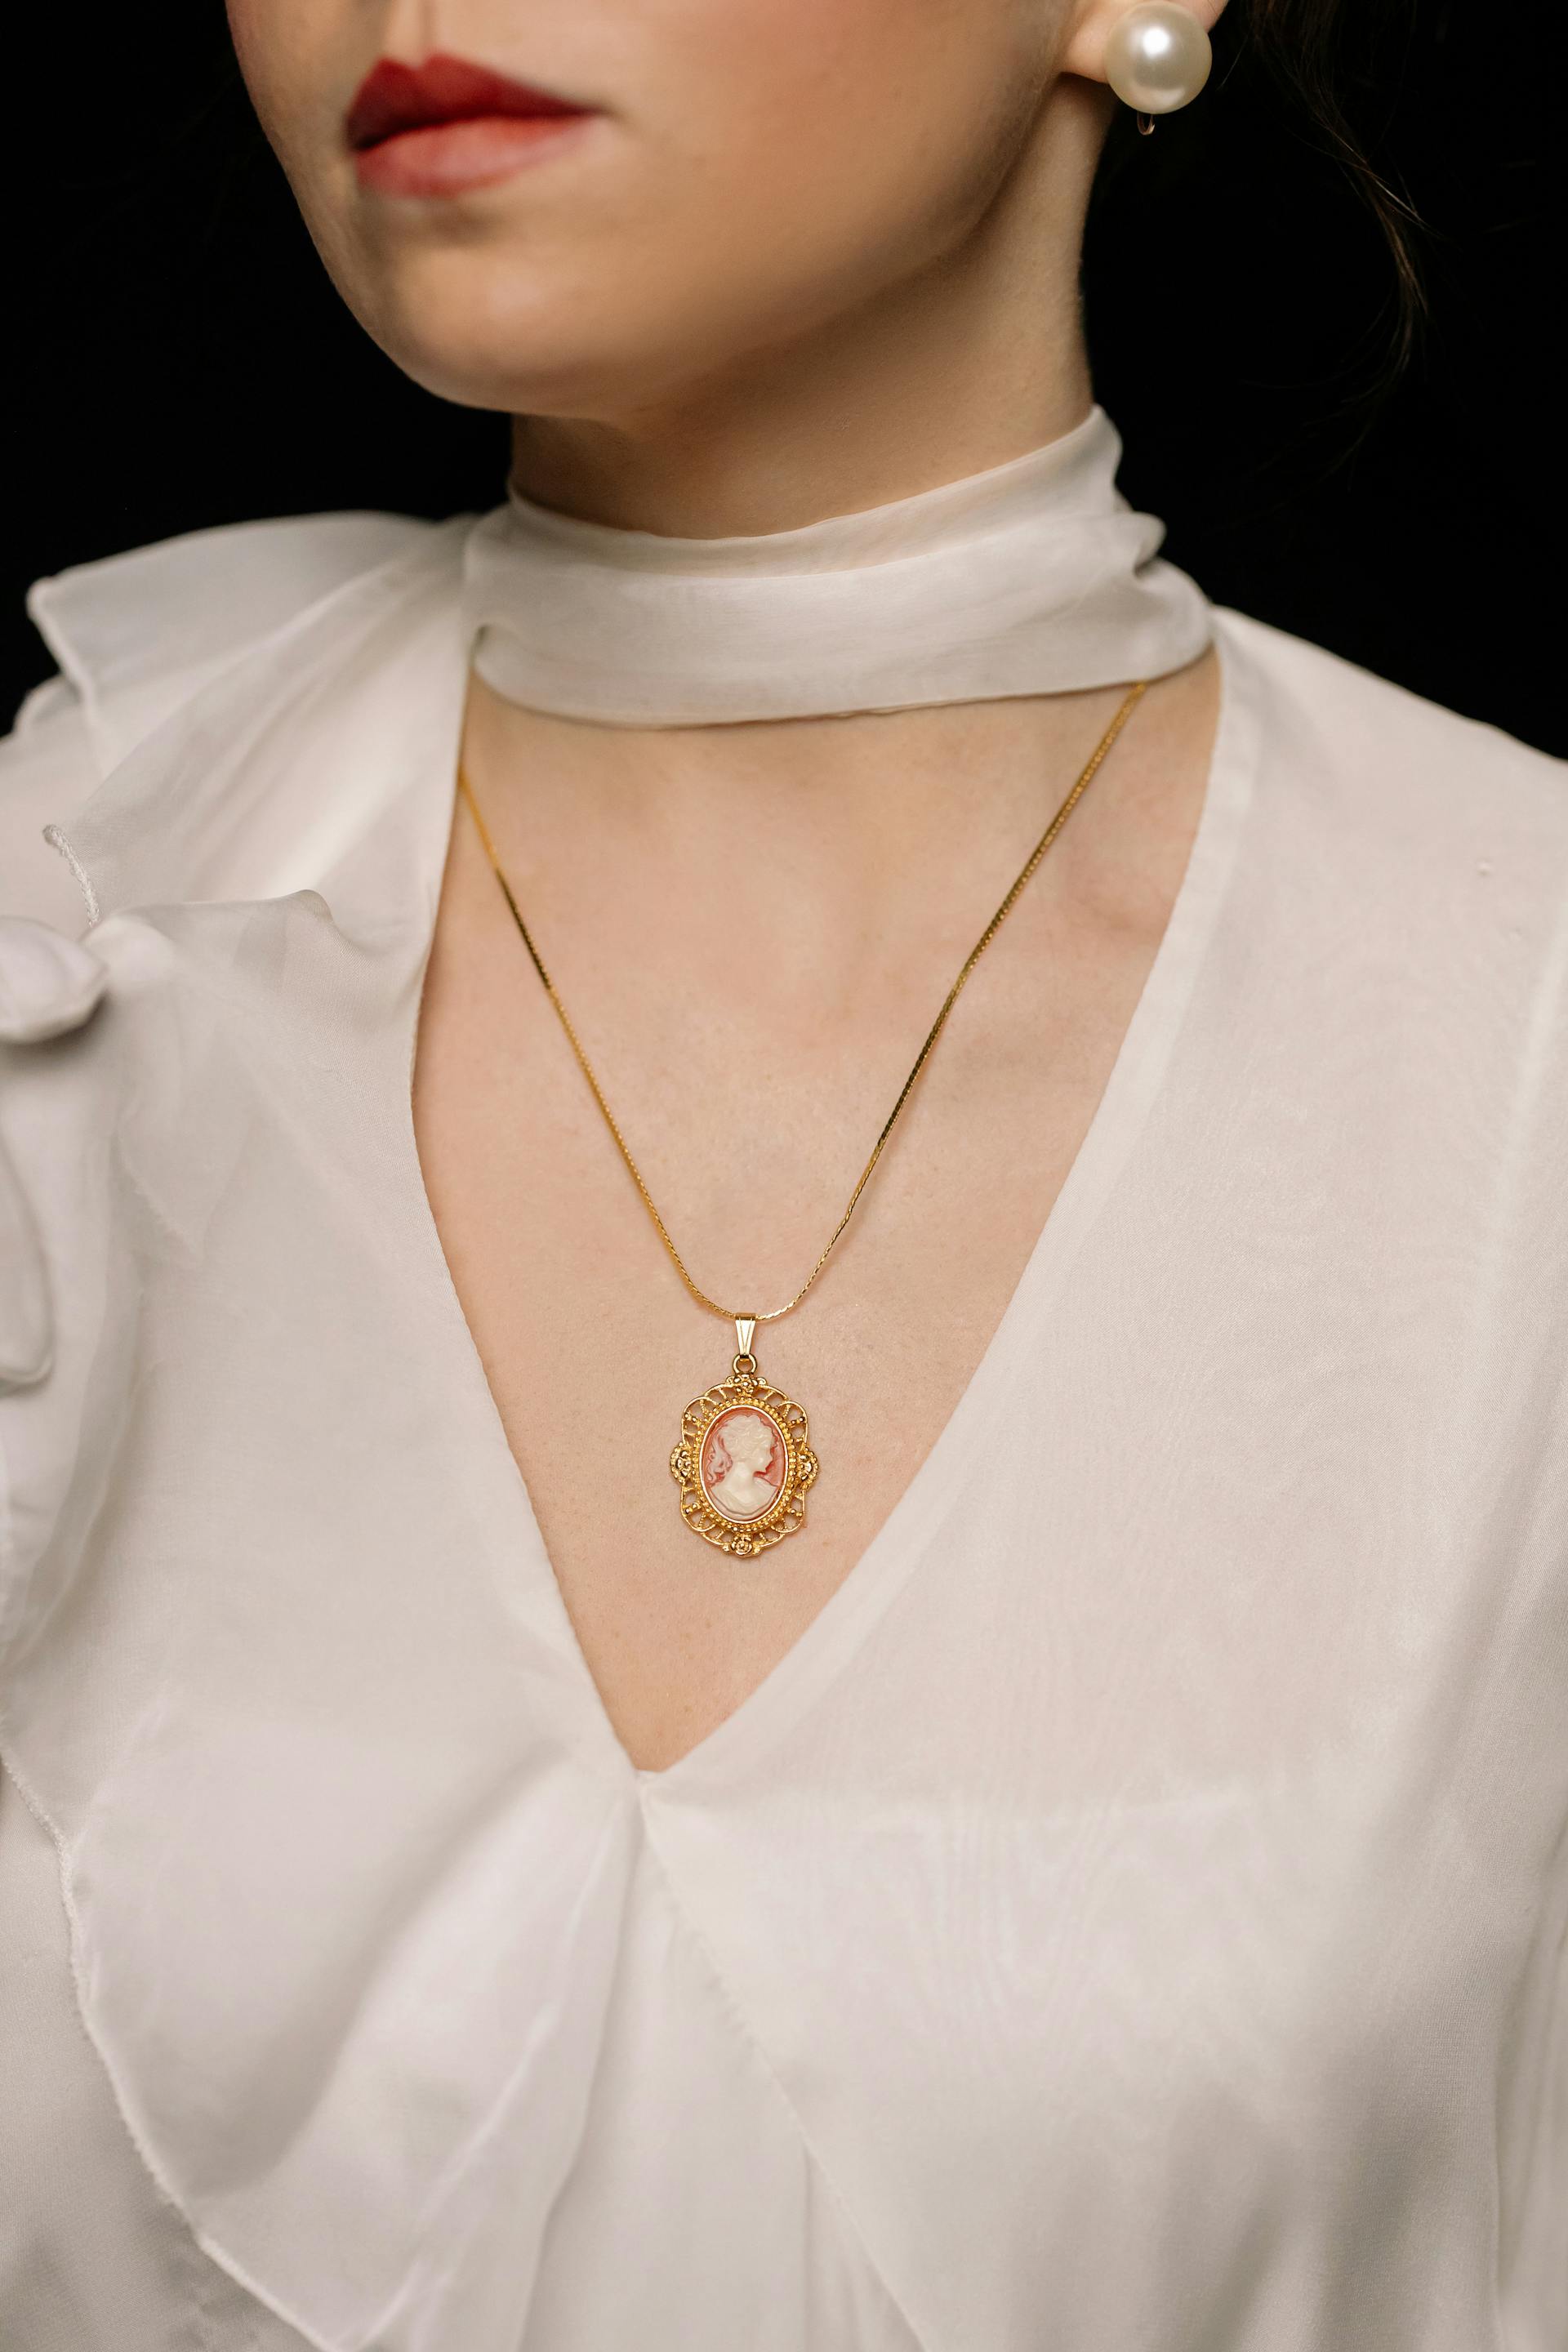 A close-up of a woman wearing pearl earrings and a gold necklace with a pendant | Source: Pexels